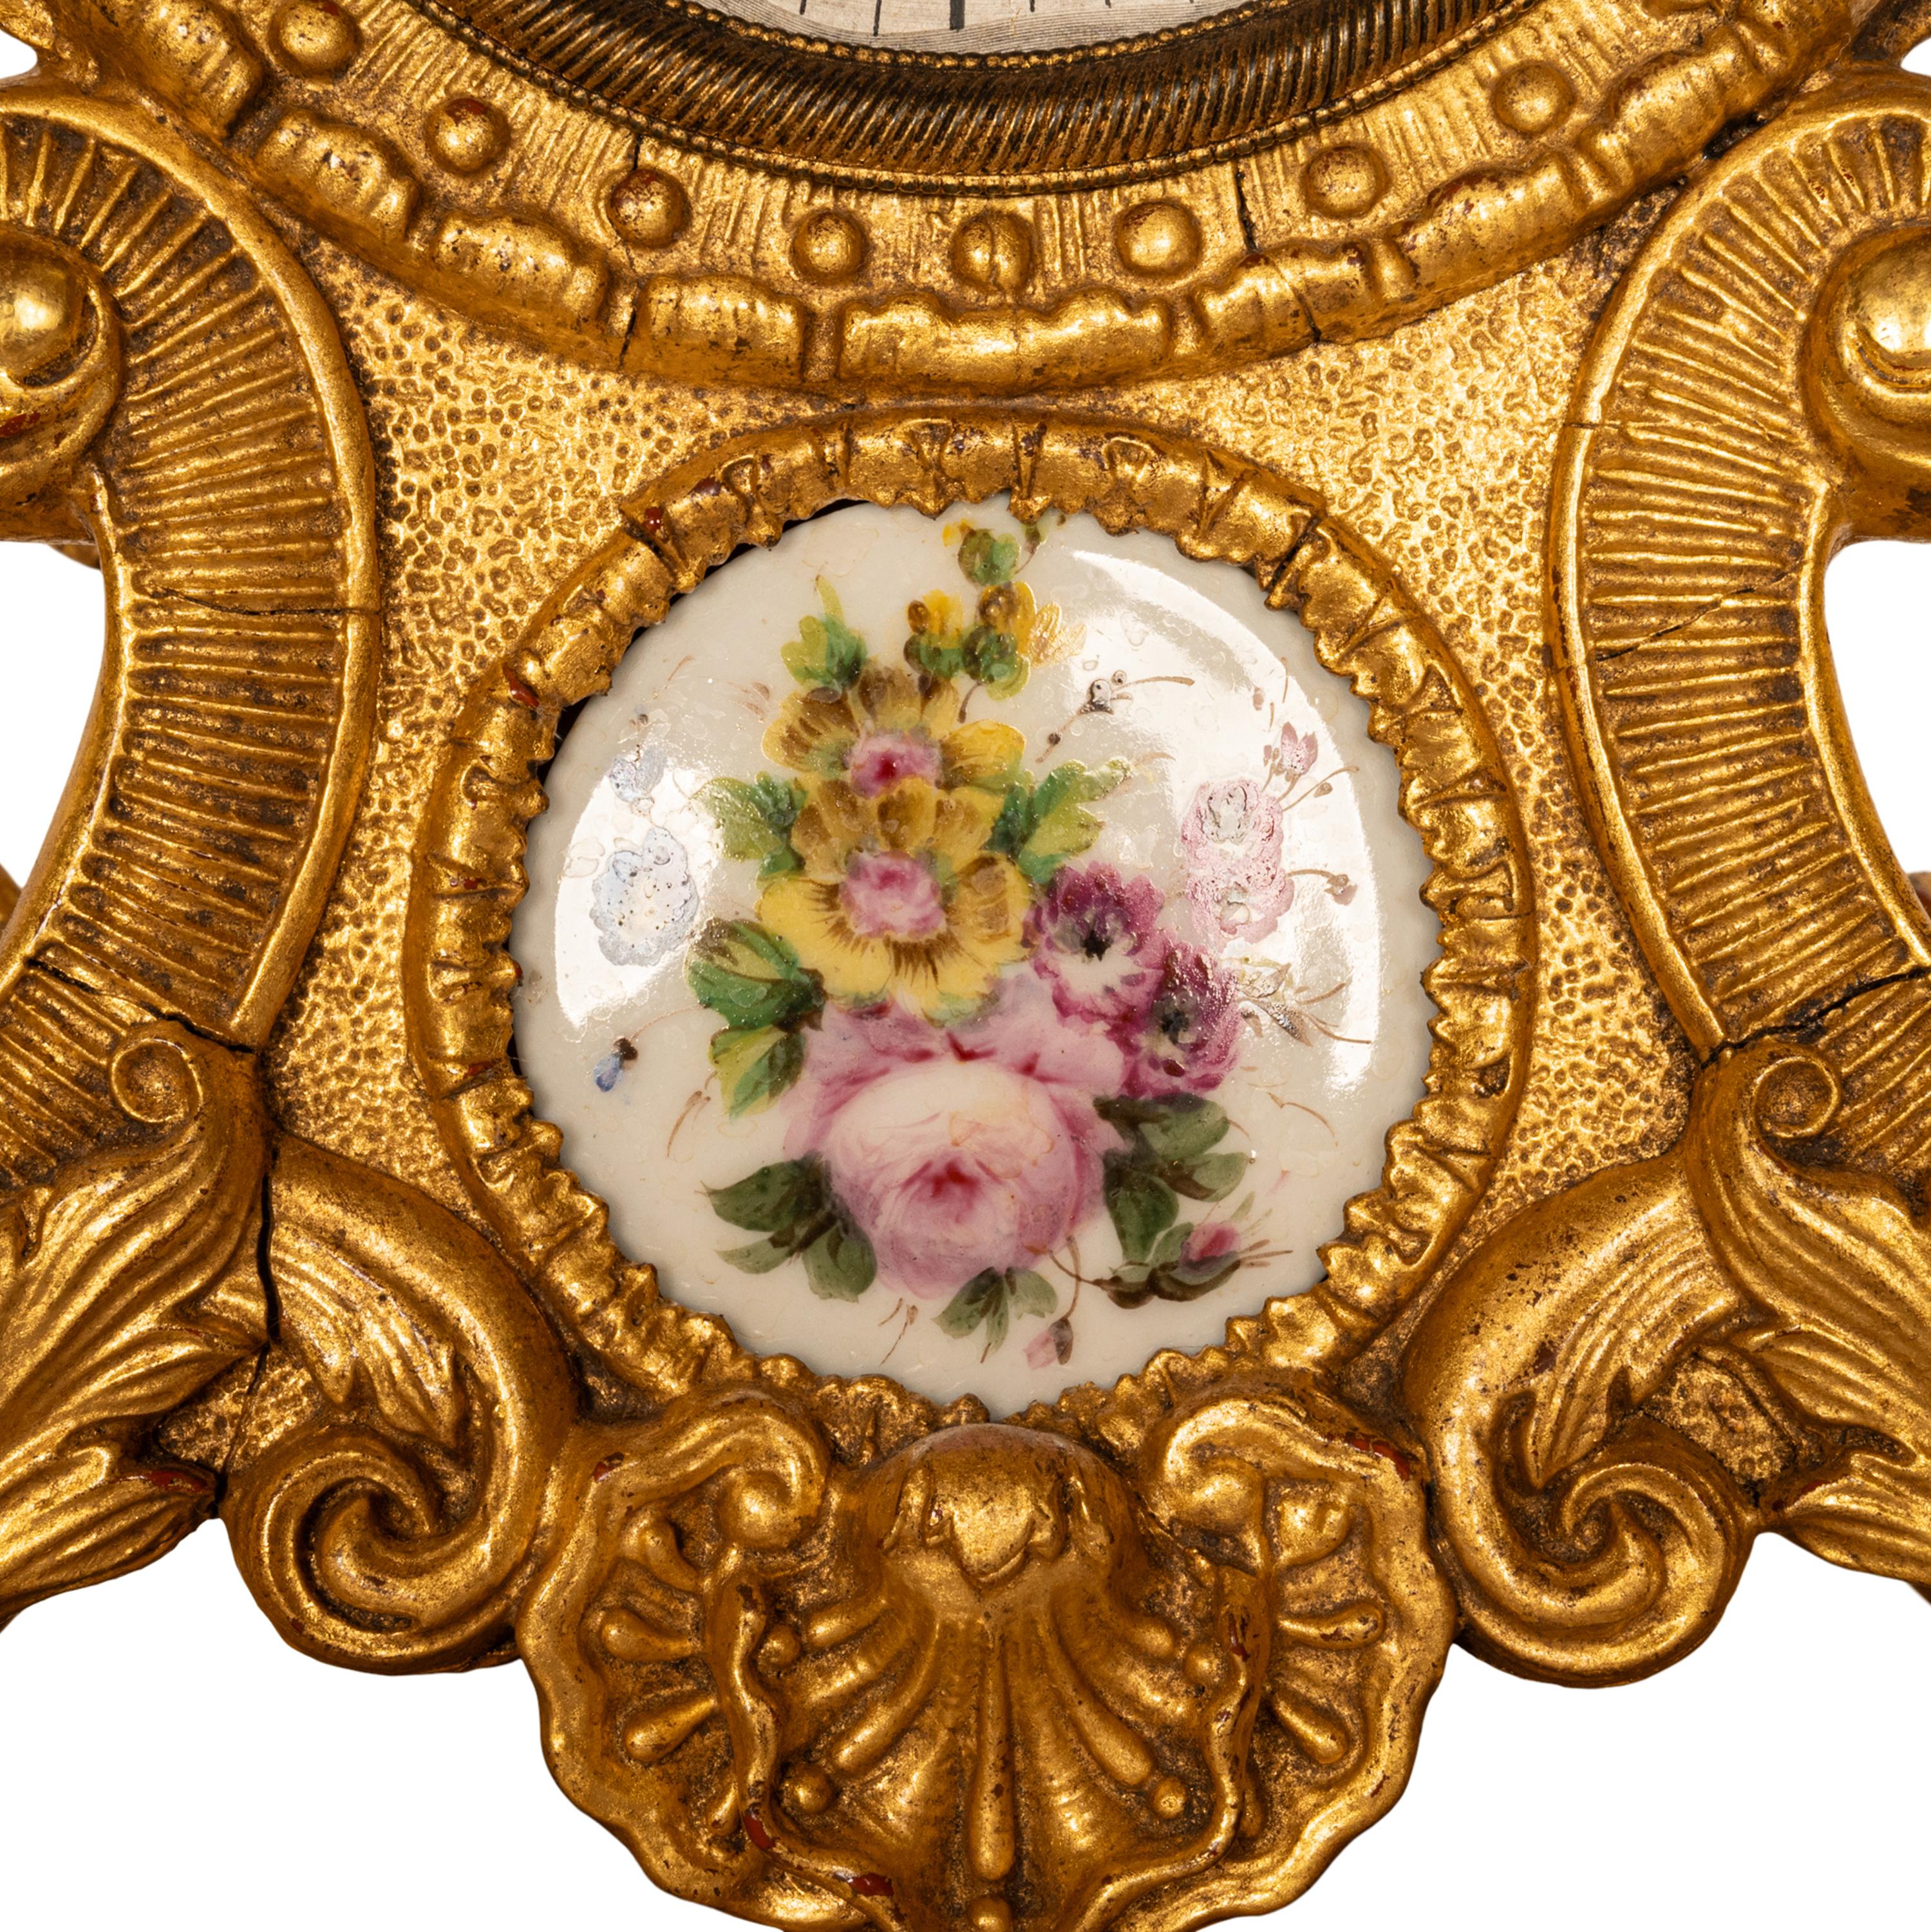 Fine Antique 19th Century French Rococo Gilded 8 Day Clock Sevres Porcelain 1830 For Sale 8